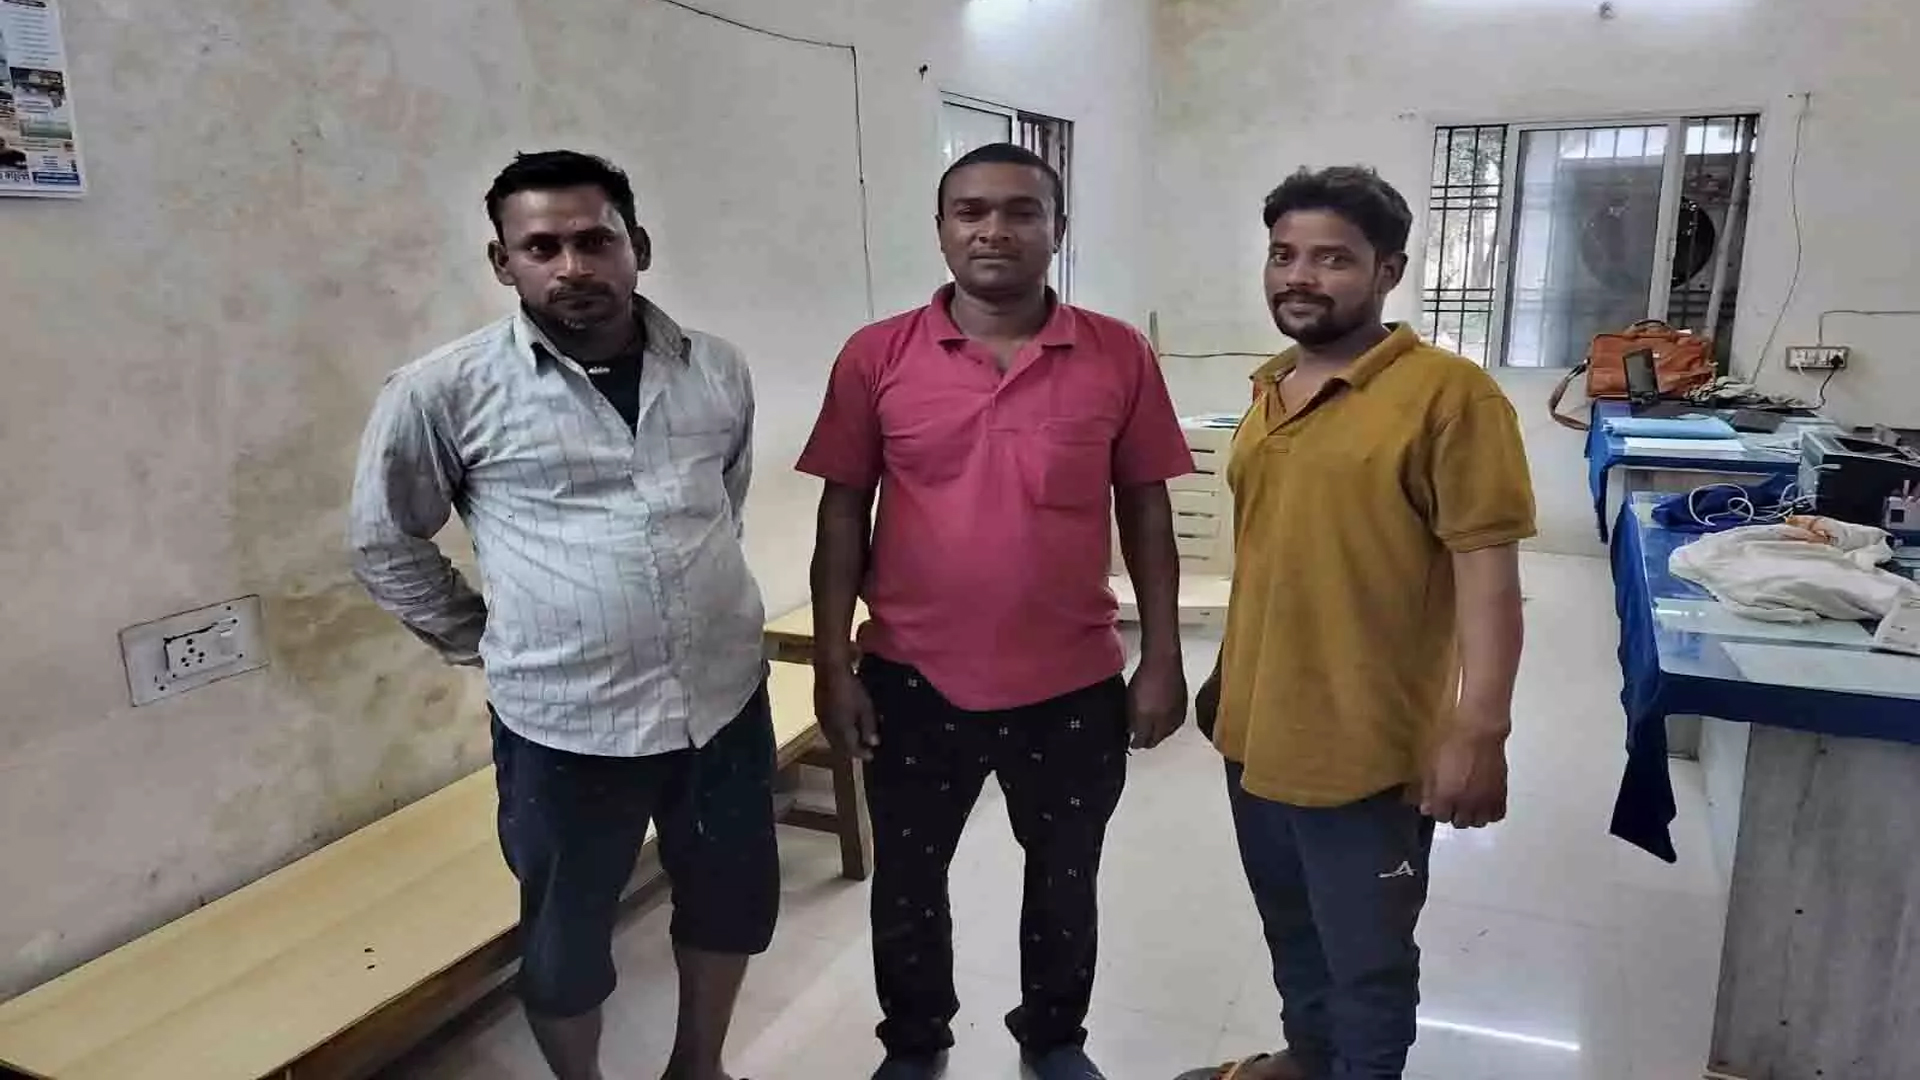 Diesel worth more than Rs 2 lakh seized, 3 accused arrested